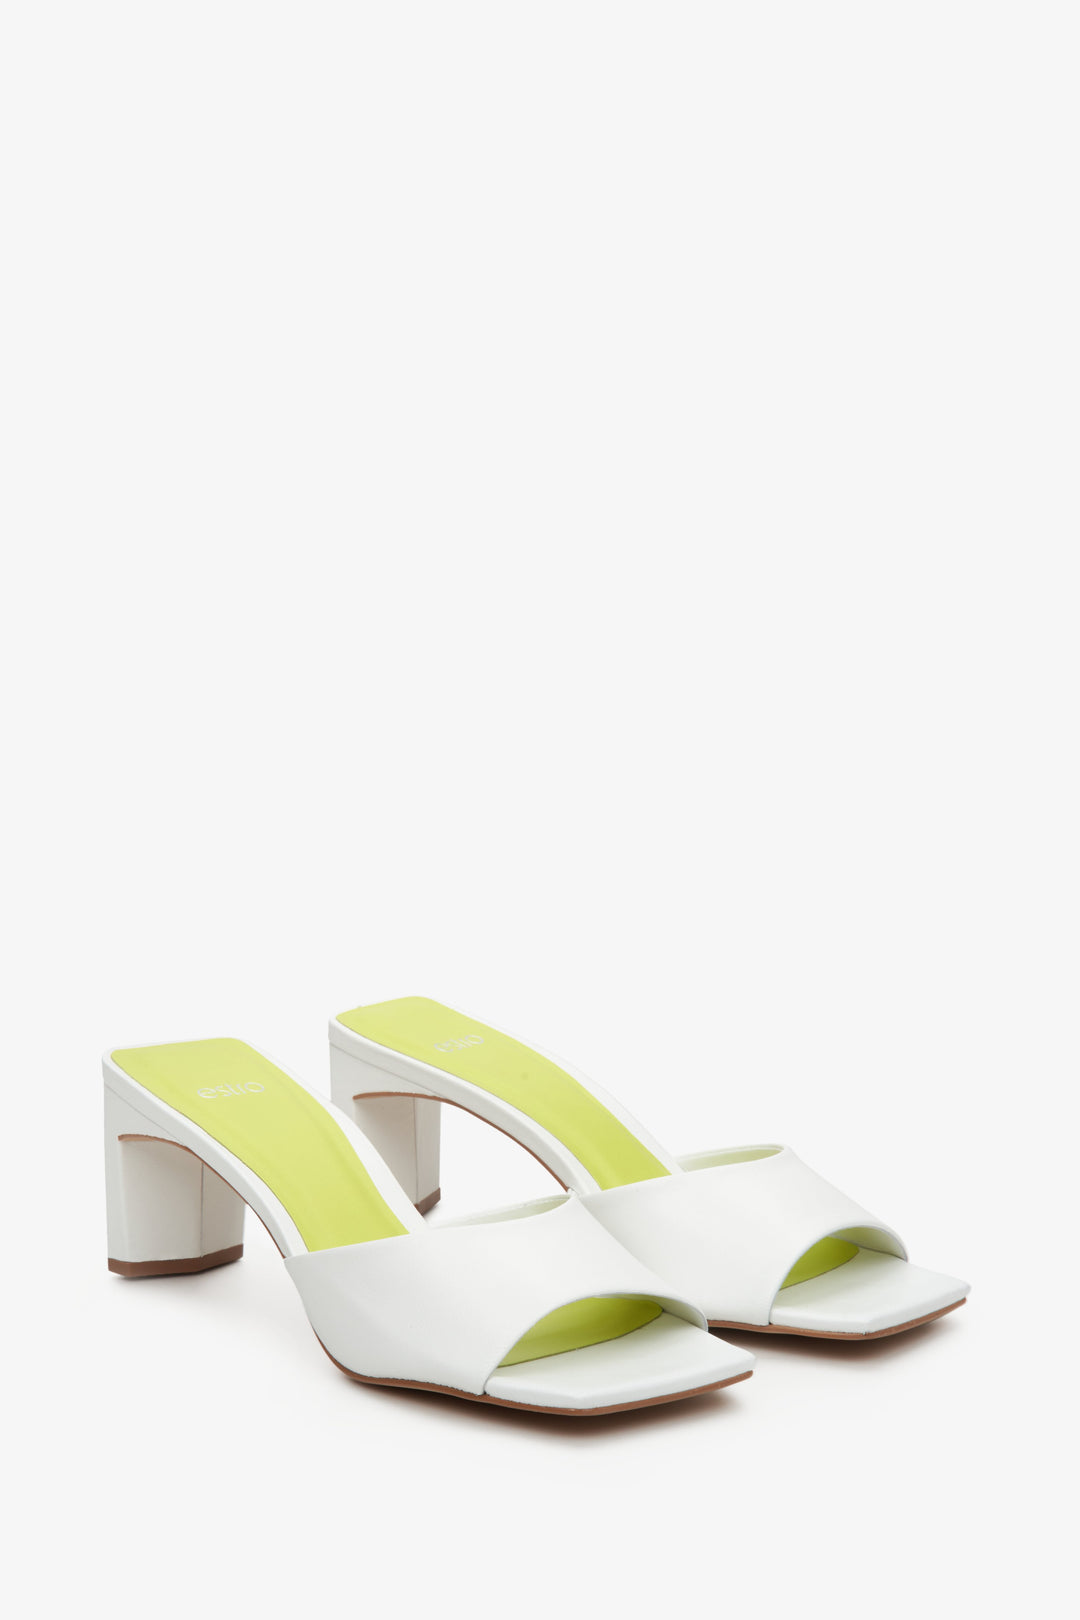 Women's white leather mules with a sturdy block heel by Estro - close-up on the shoe's toe.